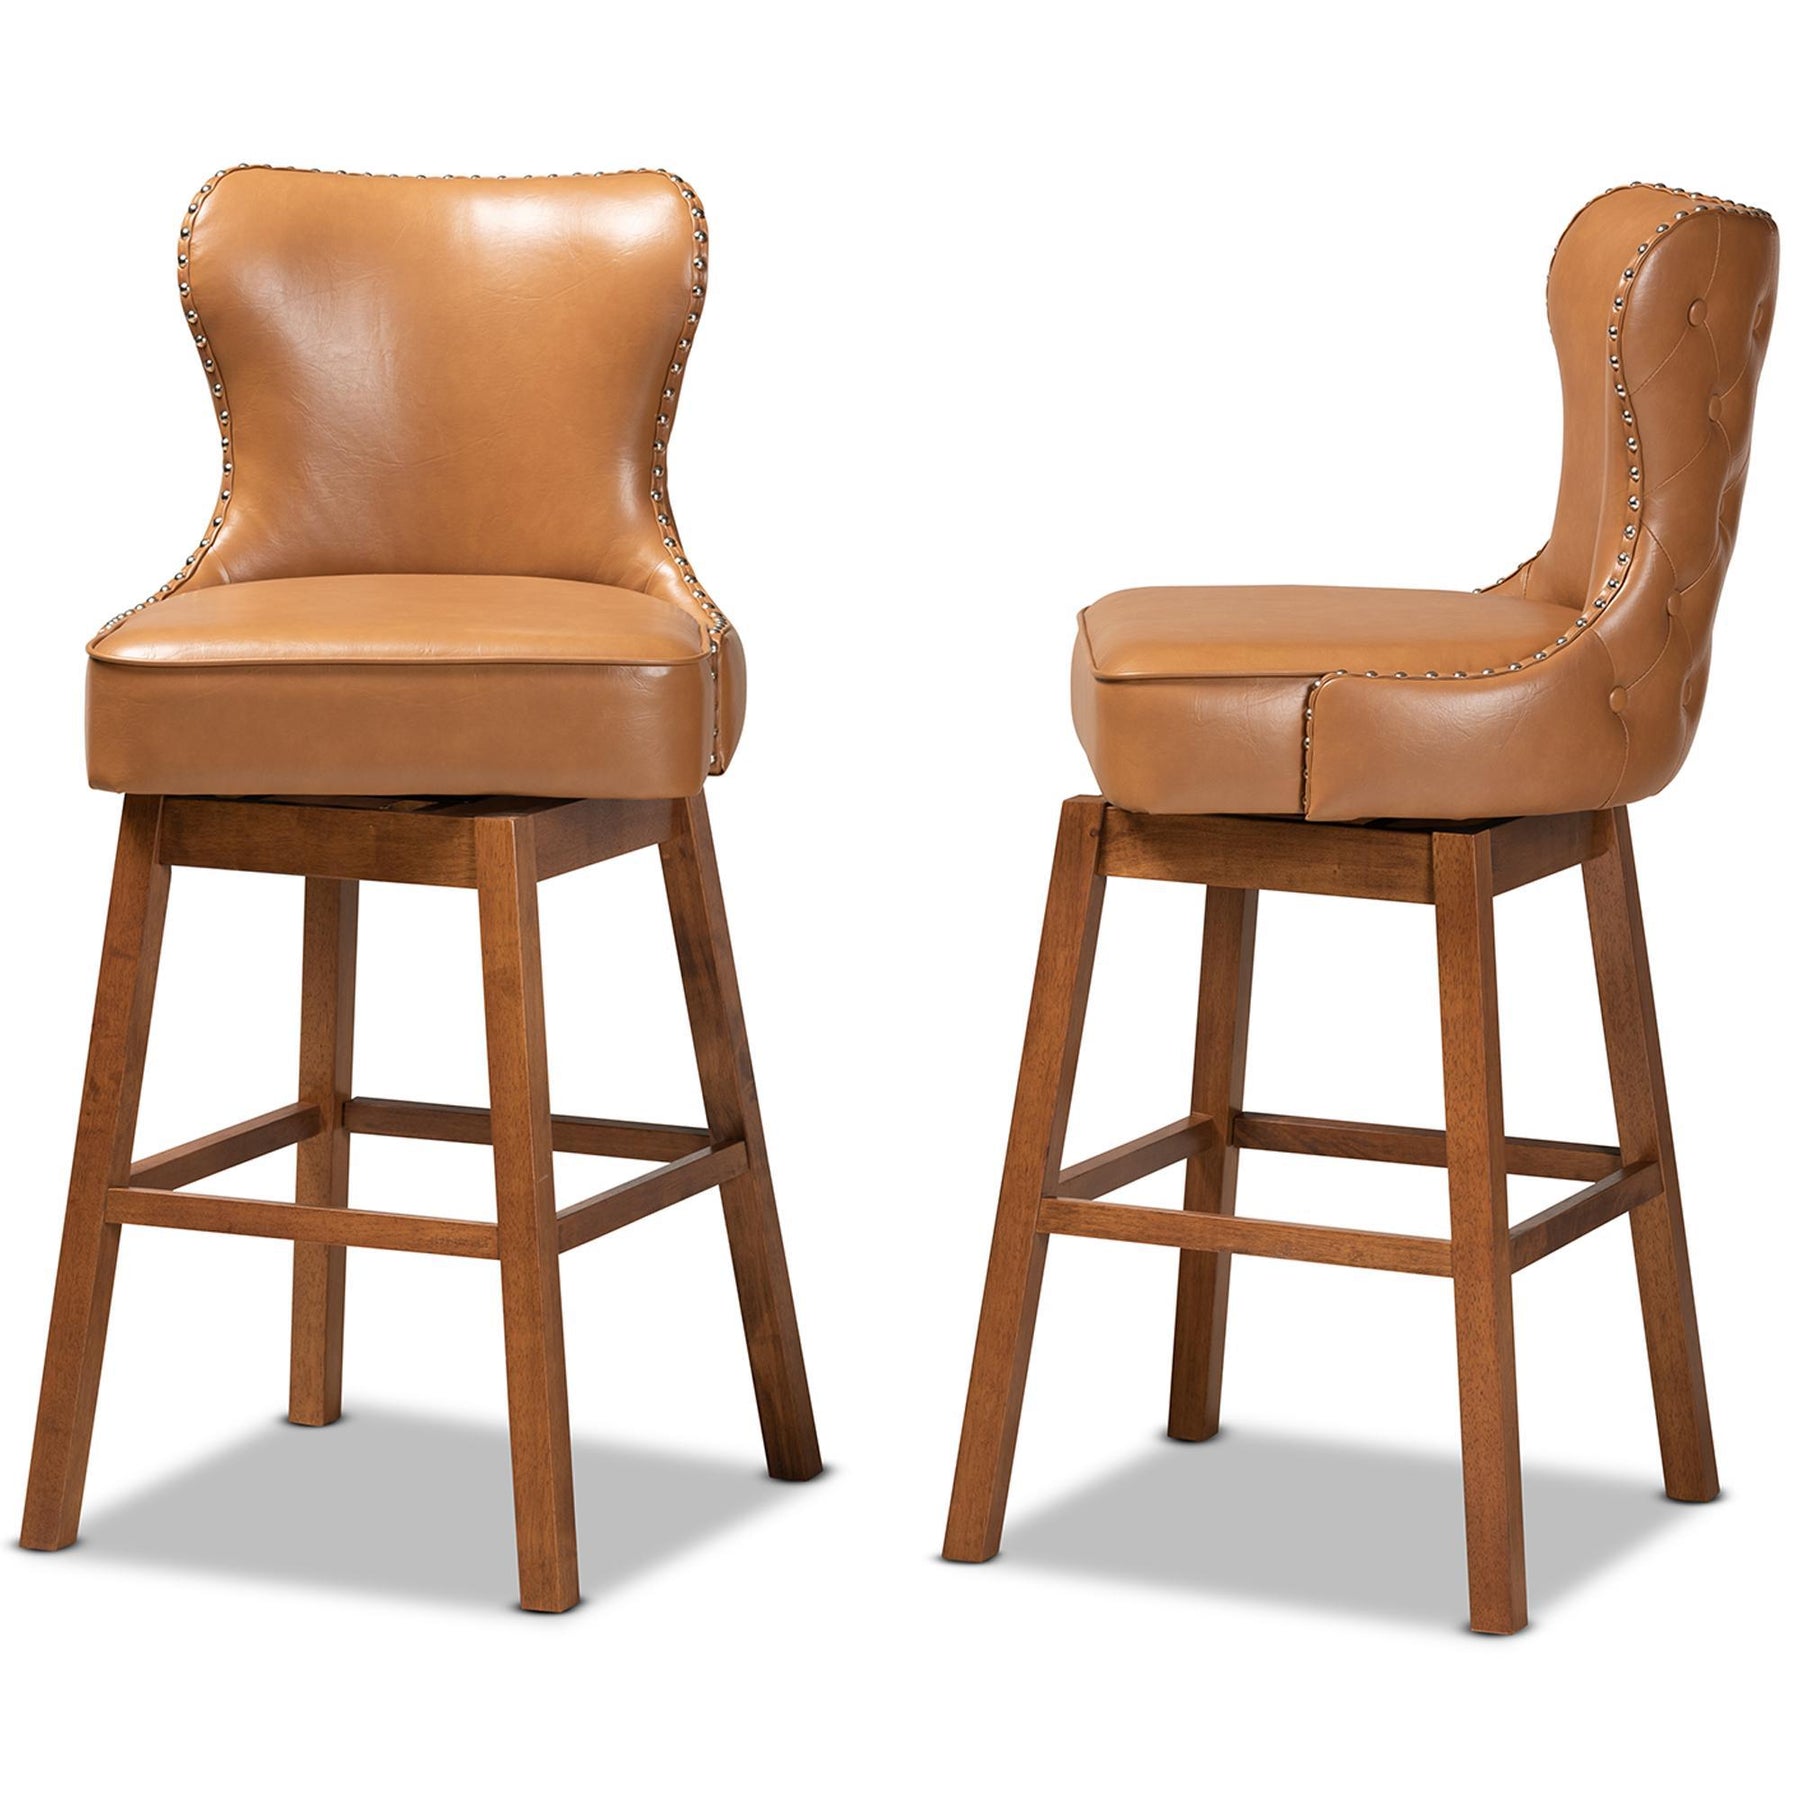 Baxton Studio Gradisca Modern And Contemporary Tan Faux Leather Upholstered And Walnut Brown Finished Wood 2-Piece Swivel Bar Stool Set - BBT5246B-Tan/Walnut-BS